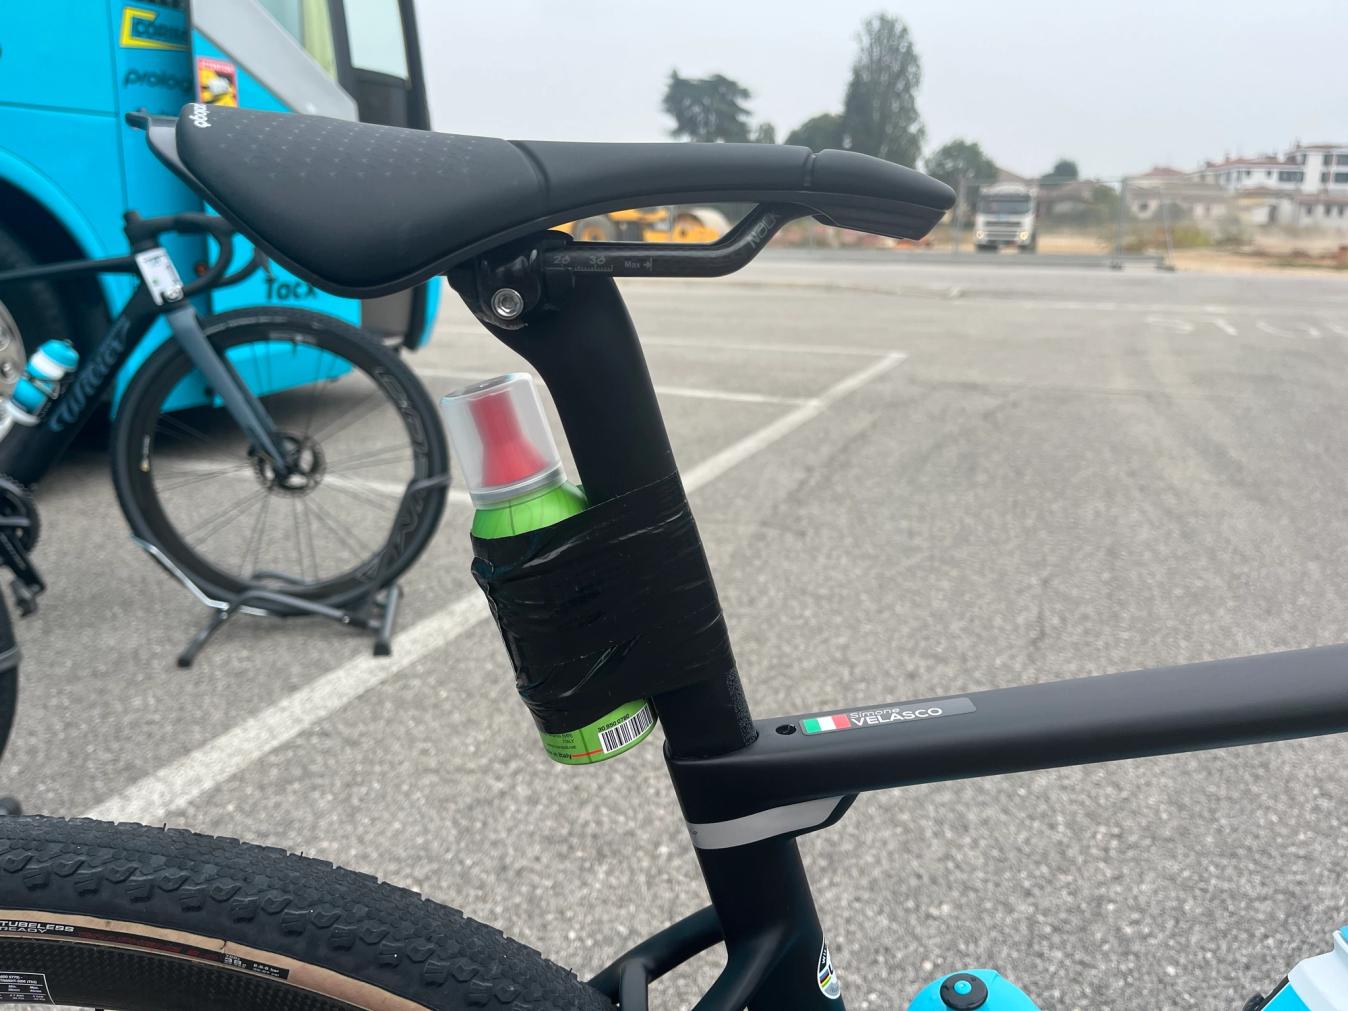 Astana Qazaqstan were one of a number of teams taping sealant to their bikes